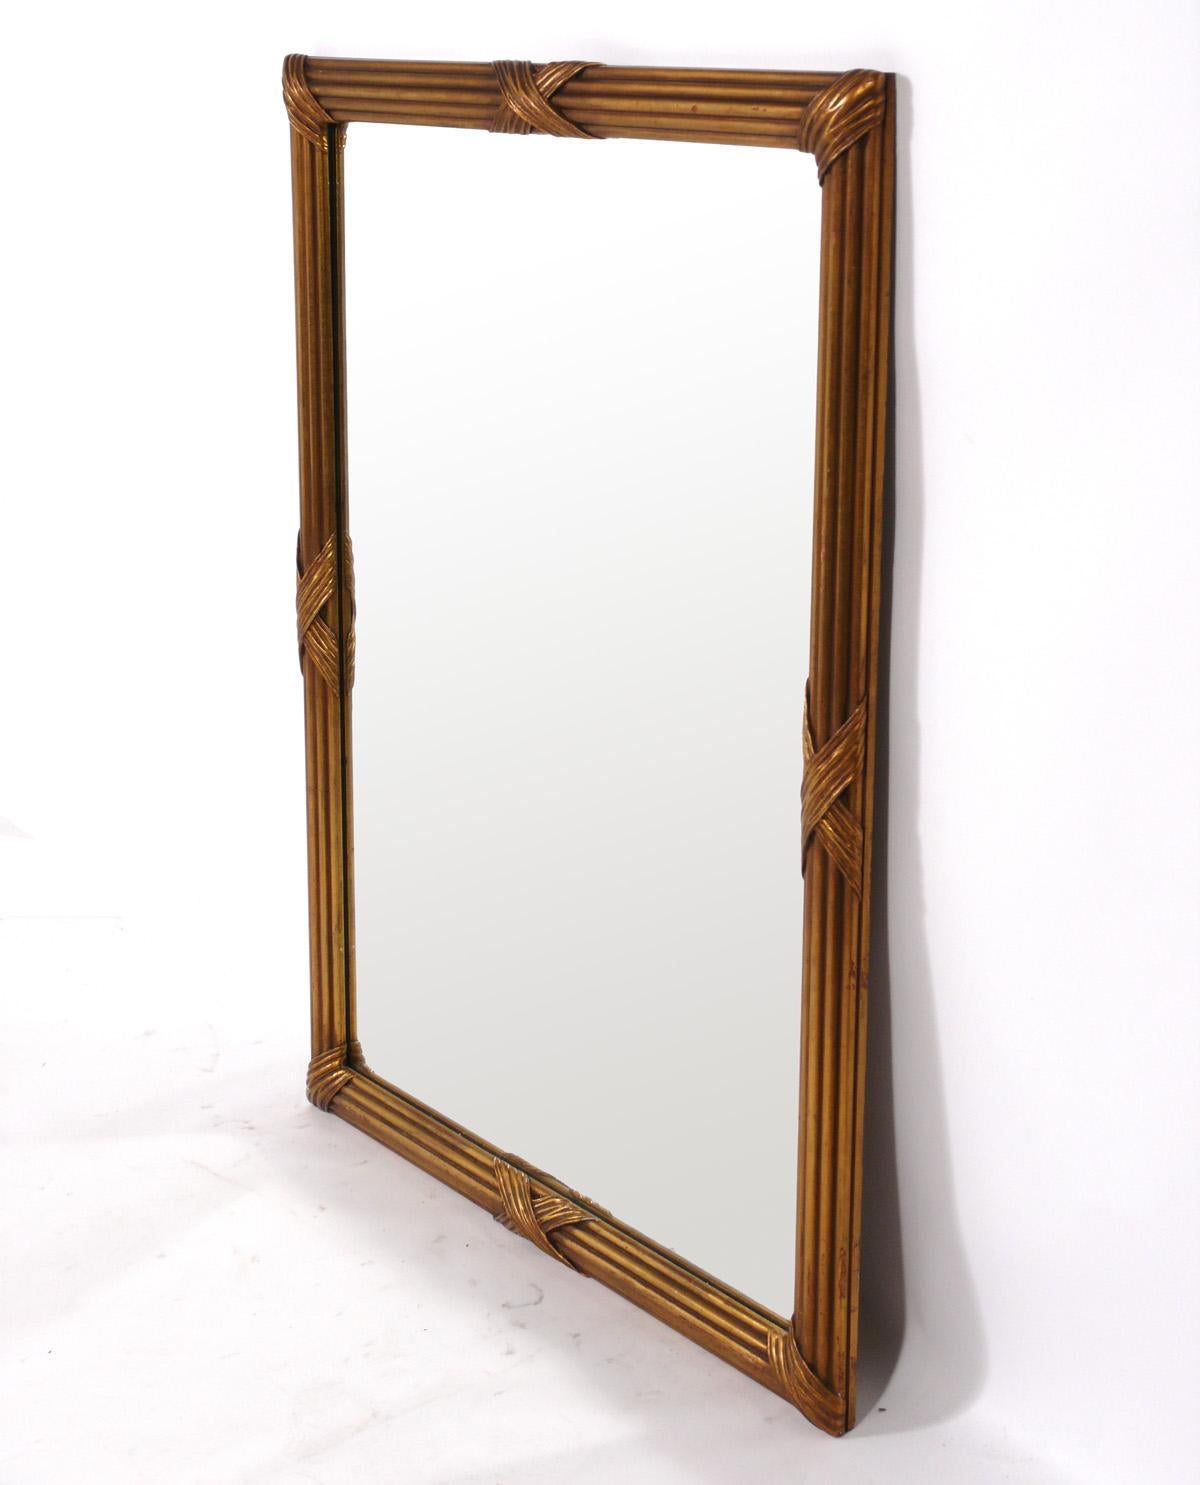 Large Gilt Mirror, American, circa 1940s. This mirror was recently removed from the legendary Carlyle Hotel in NYC. It measures an impressive 44.25